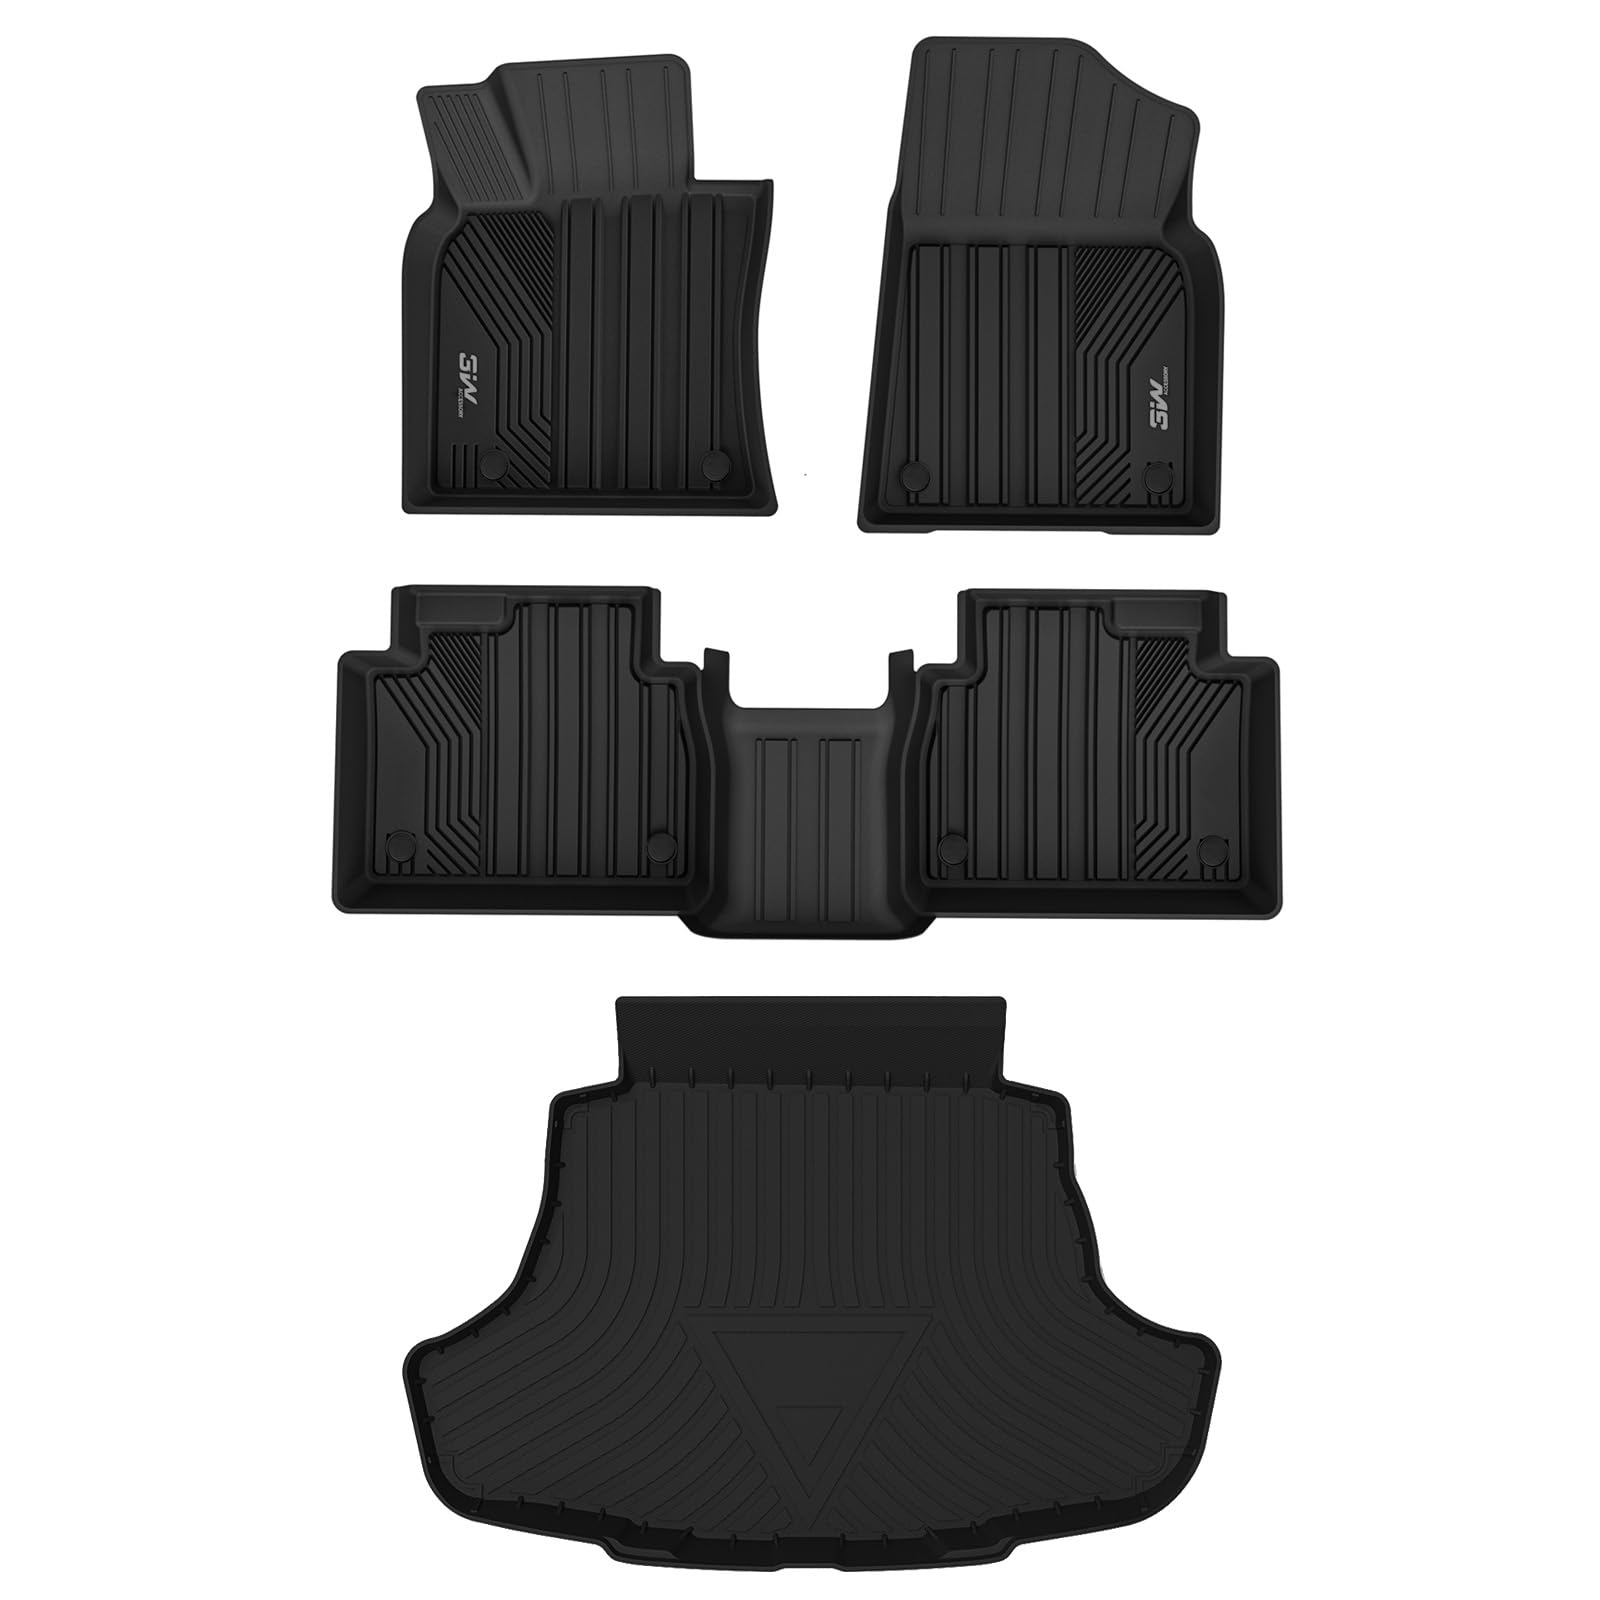 3W Toyota Camry 2018-2024 FWD (Not for Hybrid or AWD) Custom Floor Mats TPE Material & All-Weather Protection Vehicles & Parts 3Wliners 2018-2024 Camry 2018-2024 1st&2nd Row+Trunk Mat